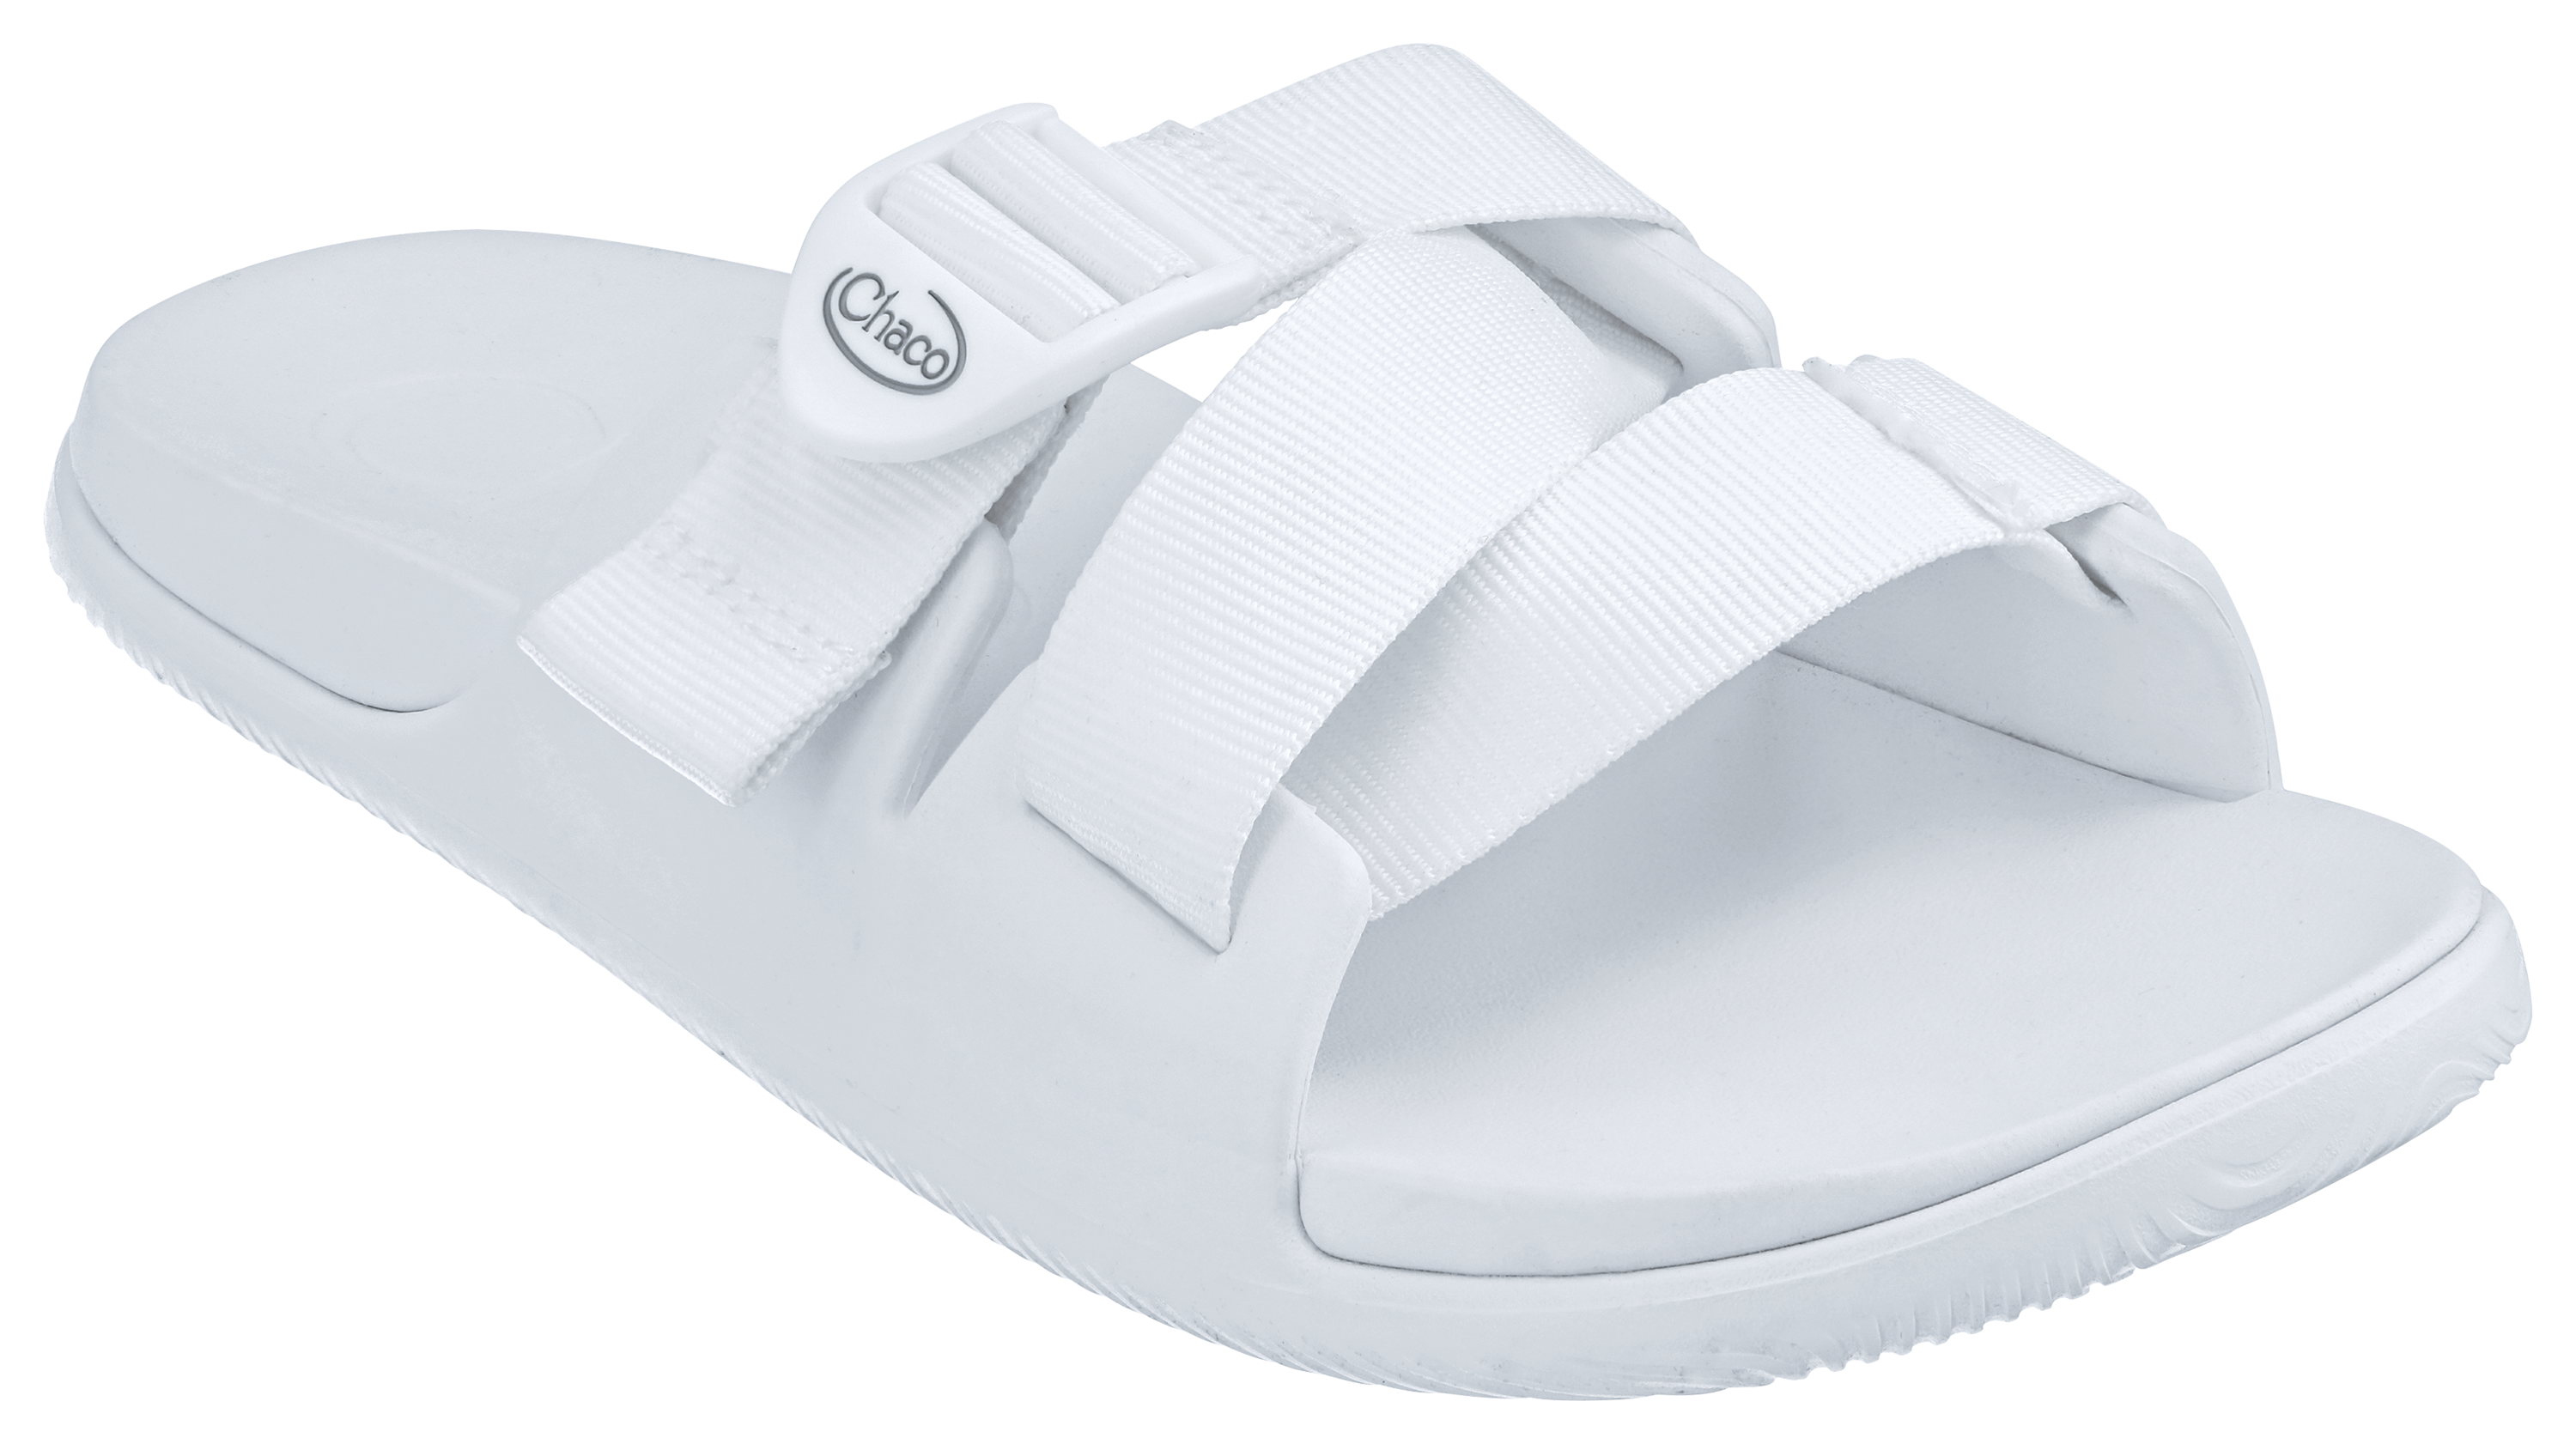 Chaco Chillos Slide Sandals for Ladies White 10M